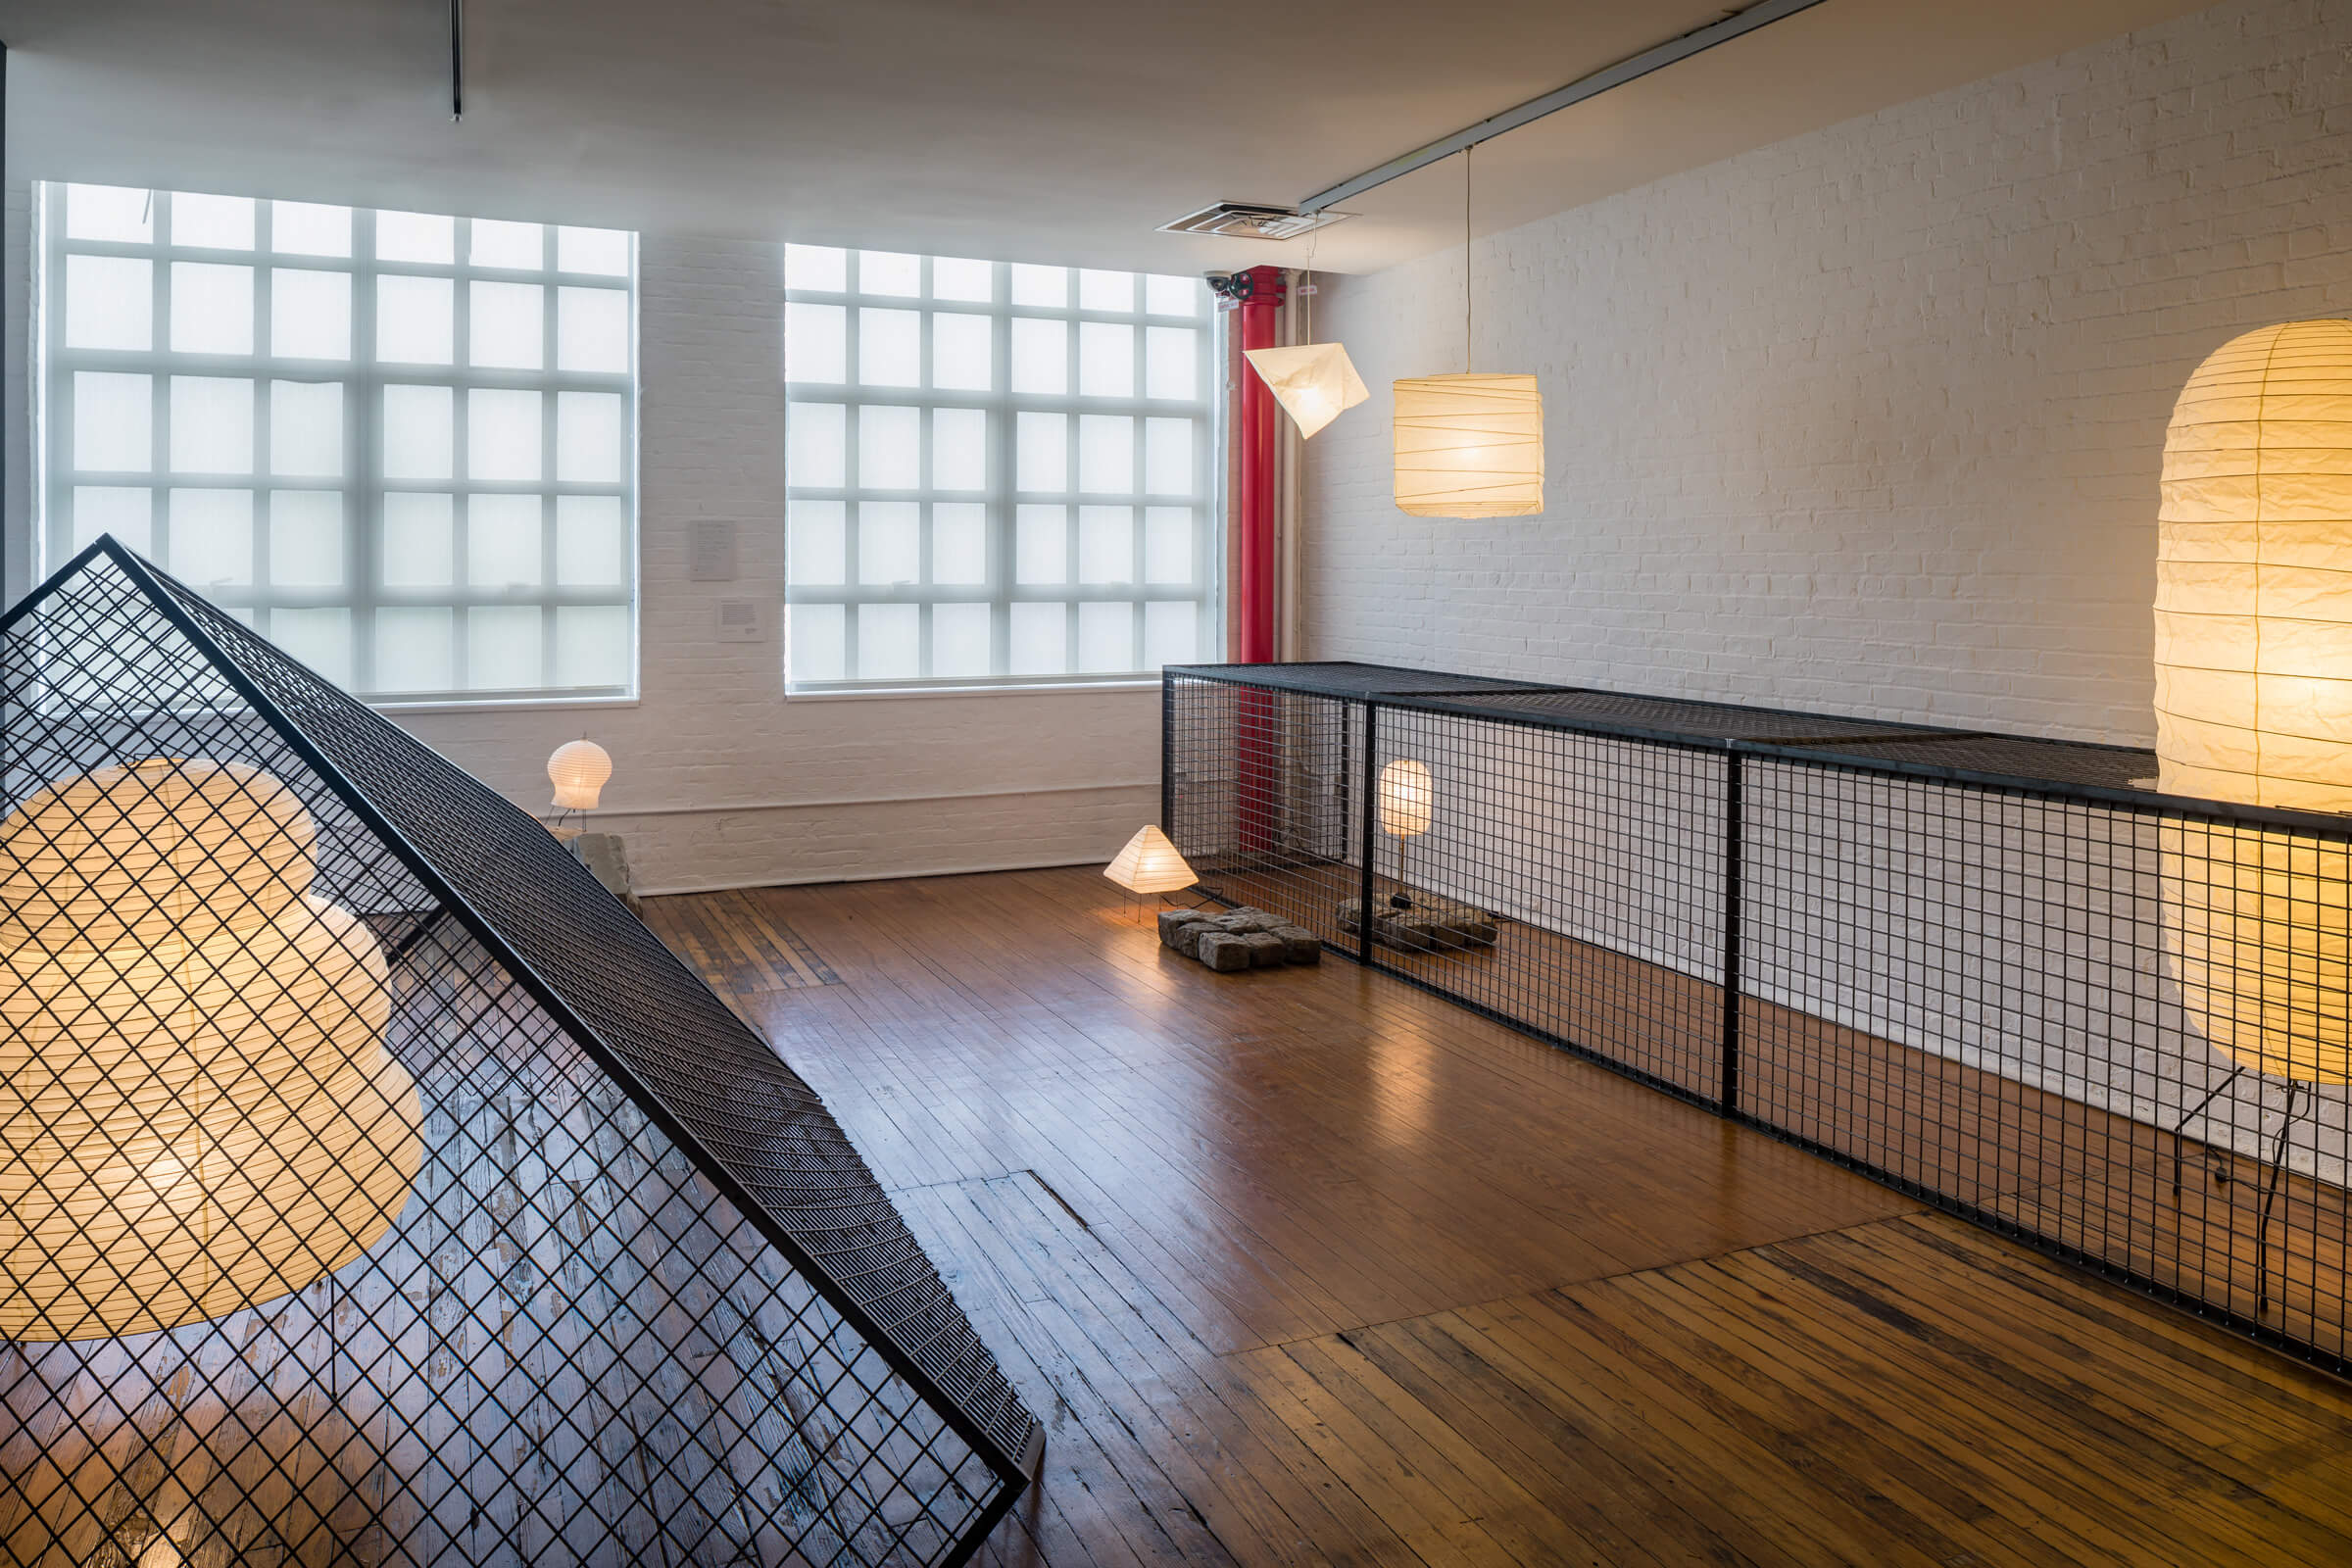 interior photo of useless architecture showing light fixtures constrained by cages